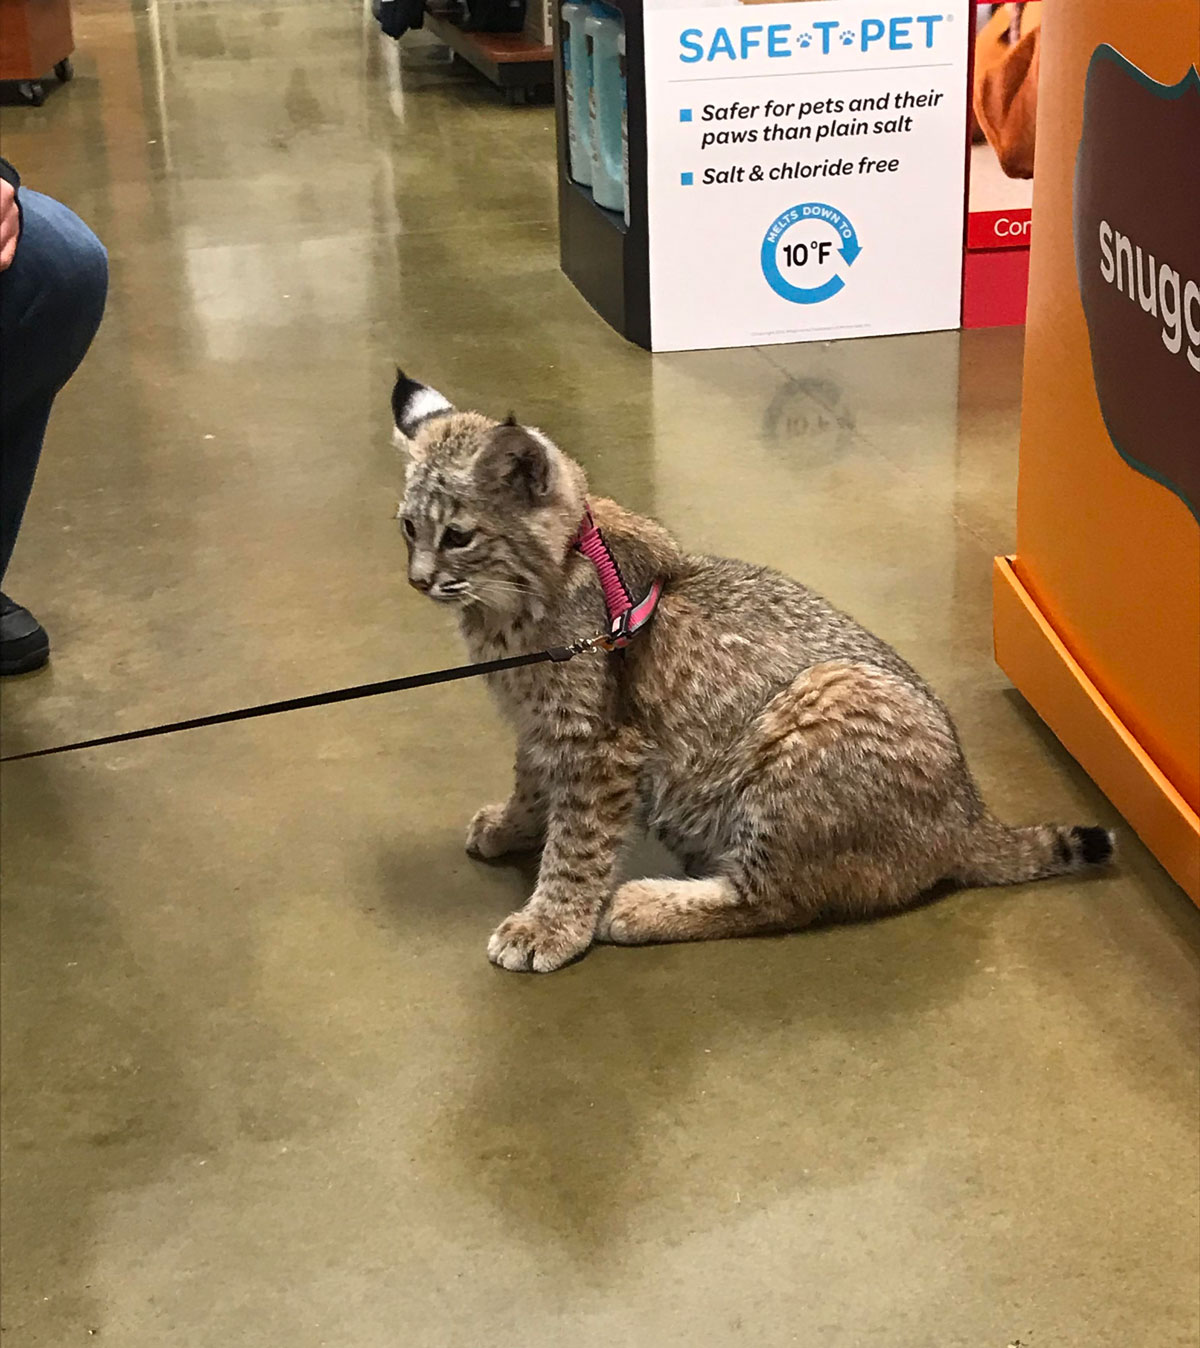 I got to meet a gorgeous bobcat in Petsmart today. Her name was Waffles and she was a sweetheart